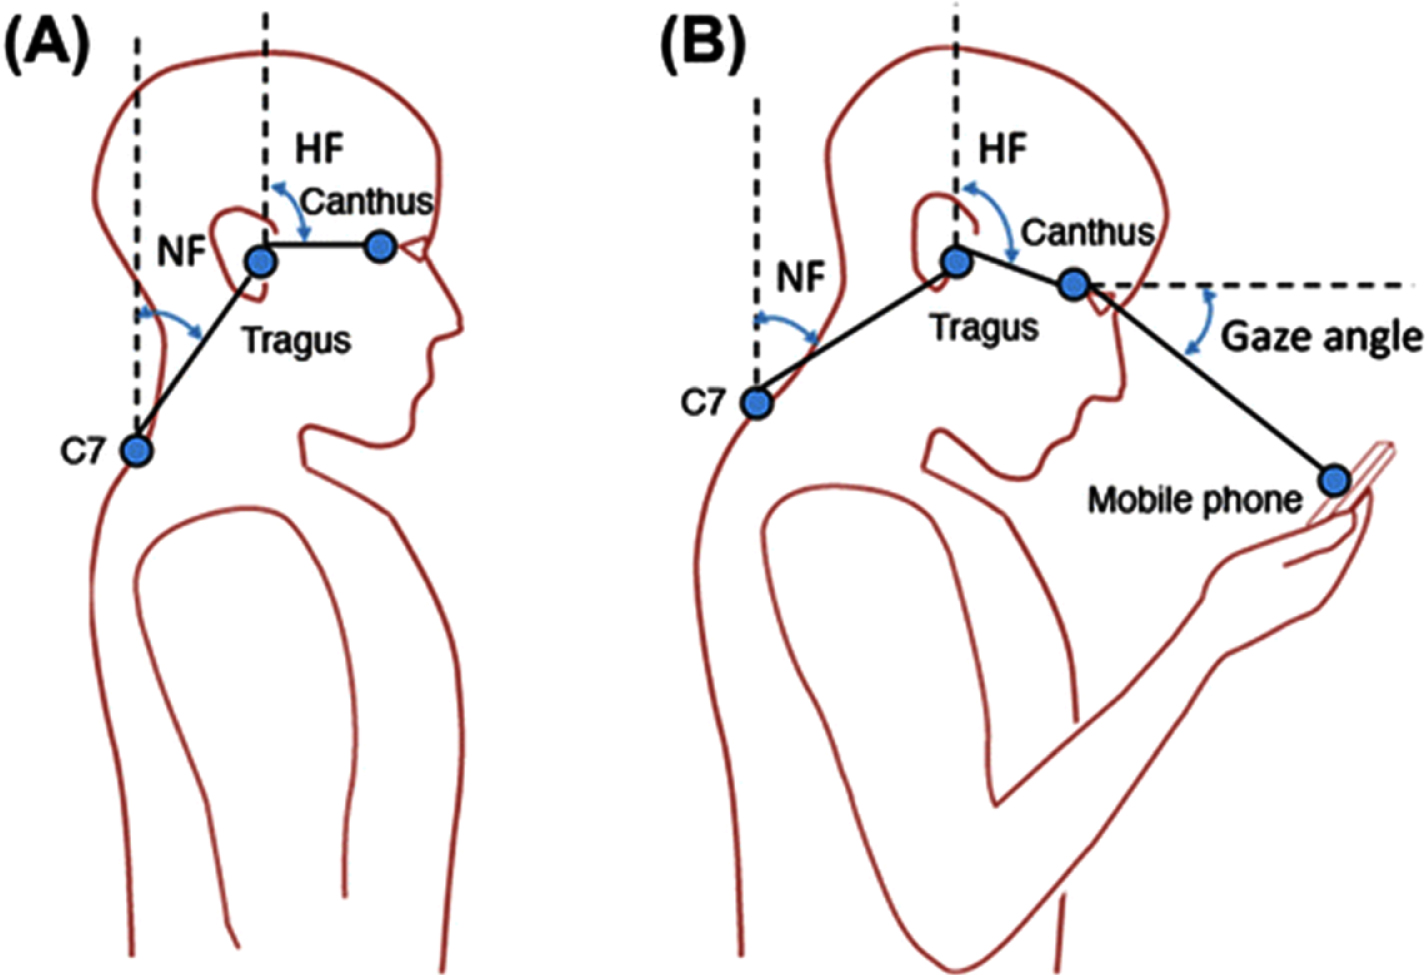 Visual depiction of the head flexion angle (HF) and neck flexion angle (NF) both in neutral head posture and during HHMD use.